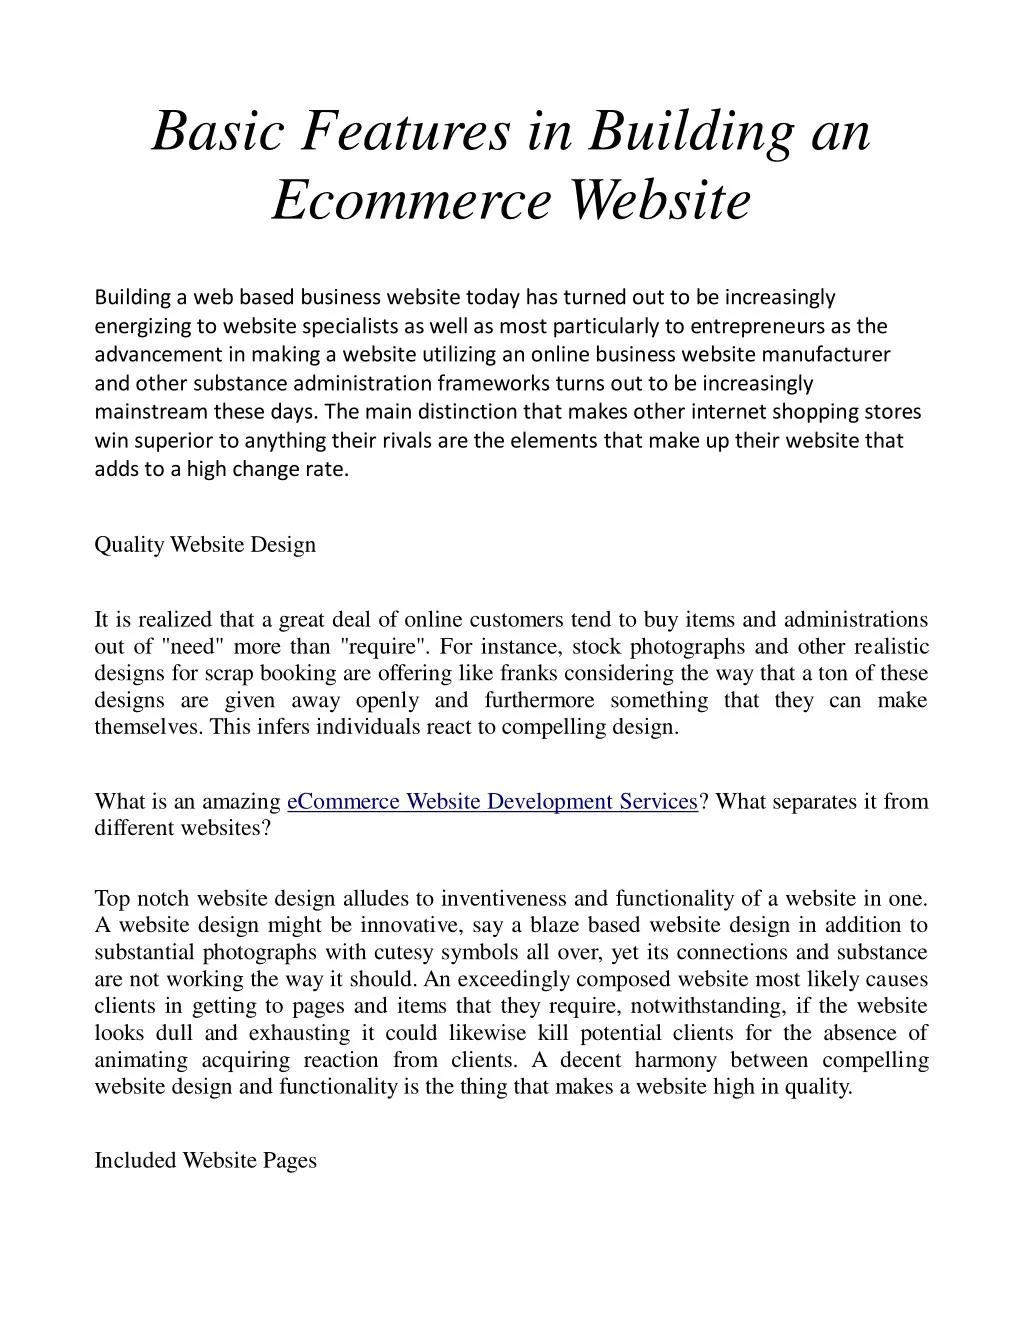 basic features in building an ecommerce website